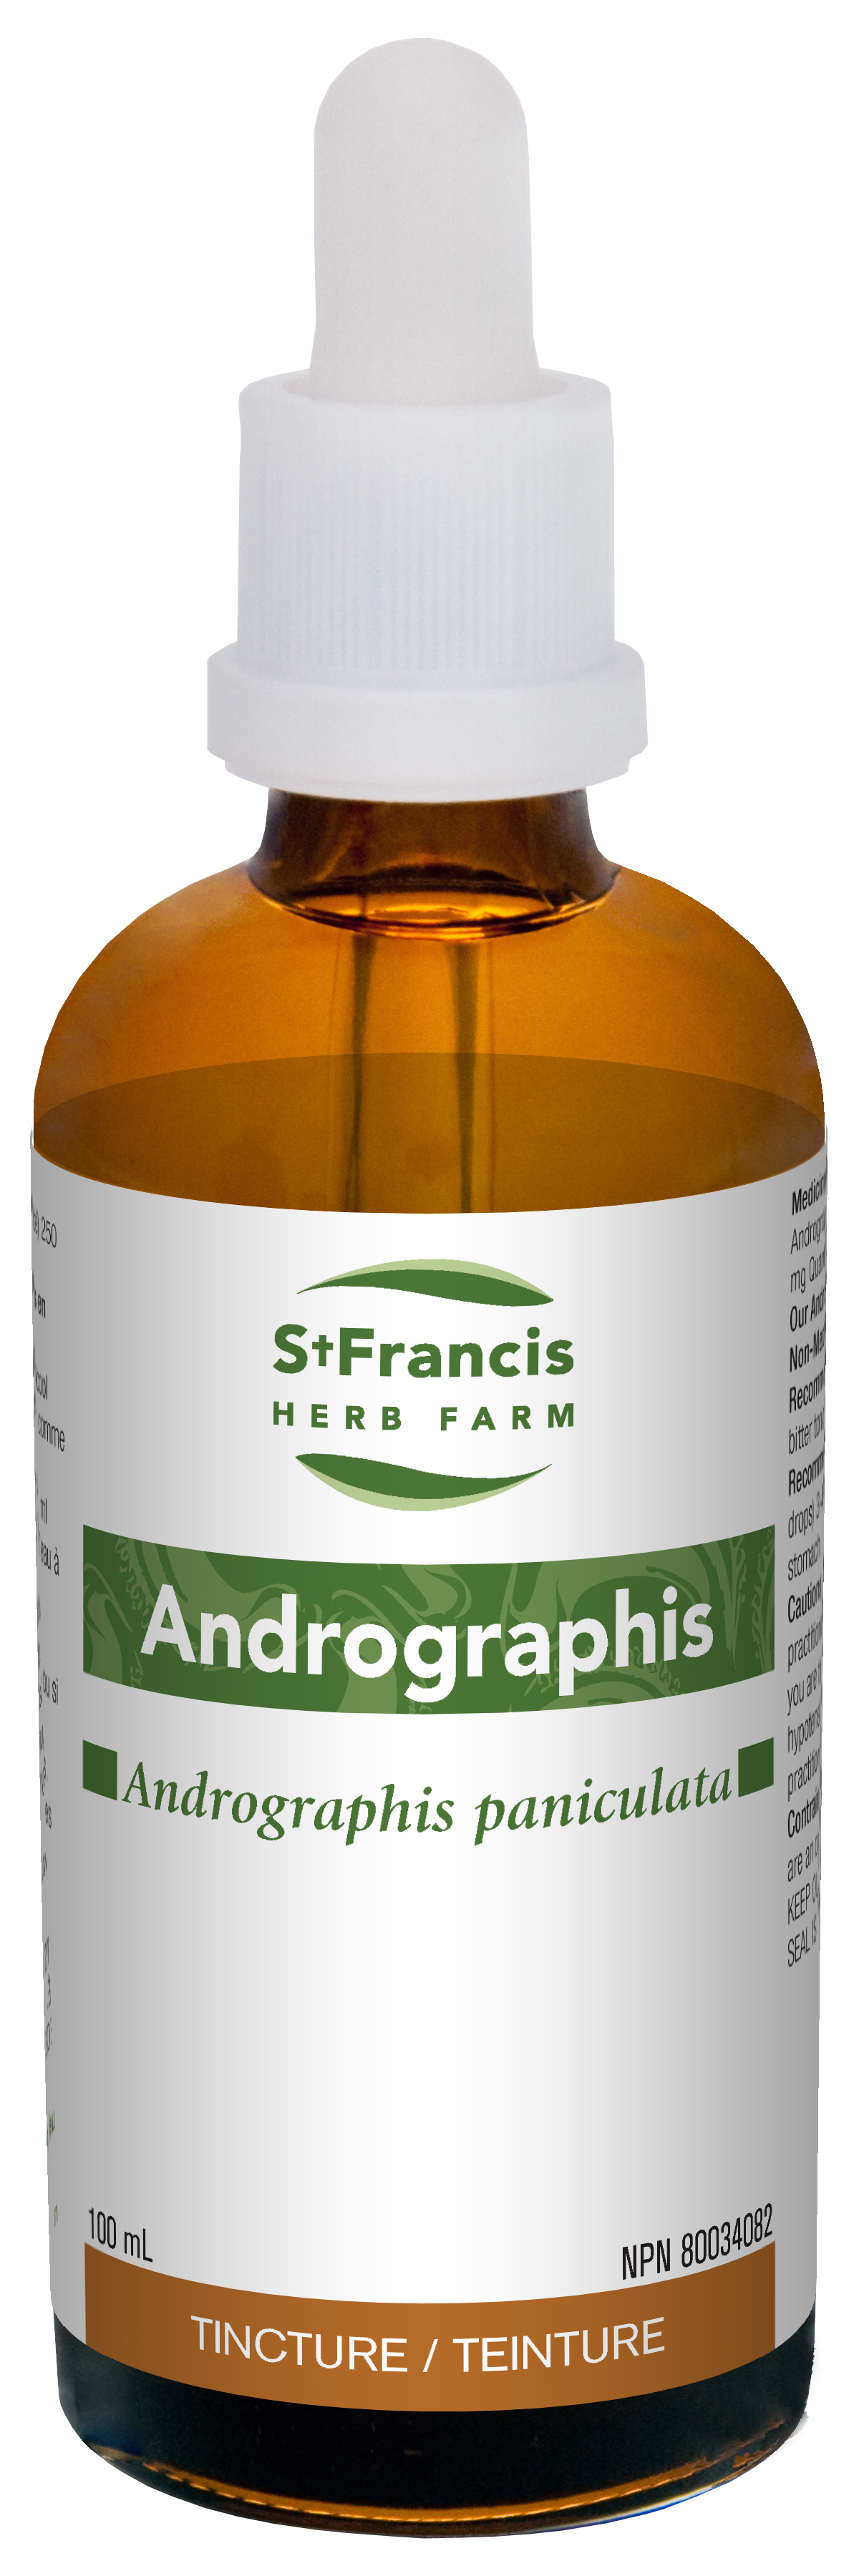 St. Francis Herb Farm - Andrographis - Single Herb Tincture1200 x 3600